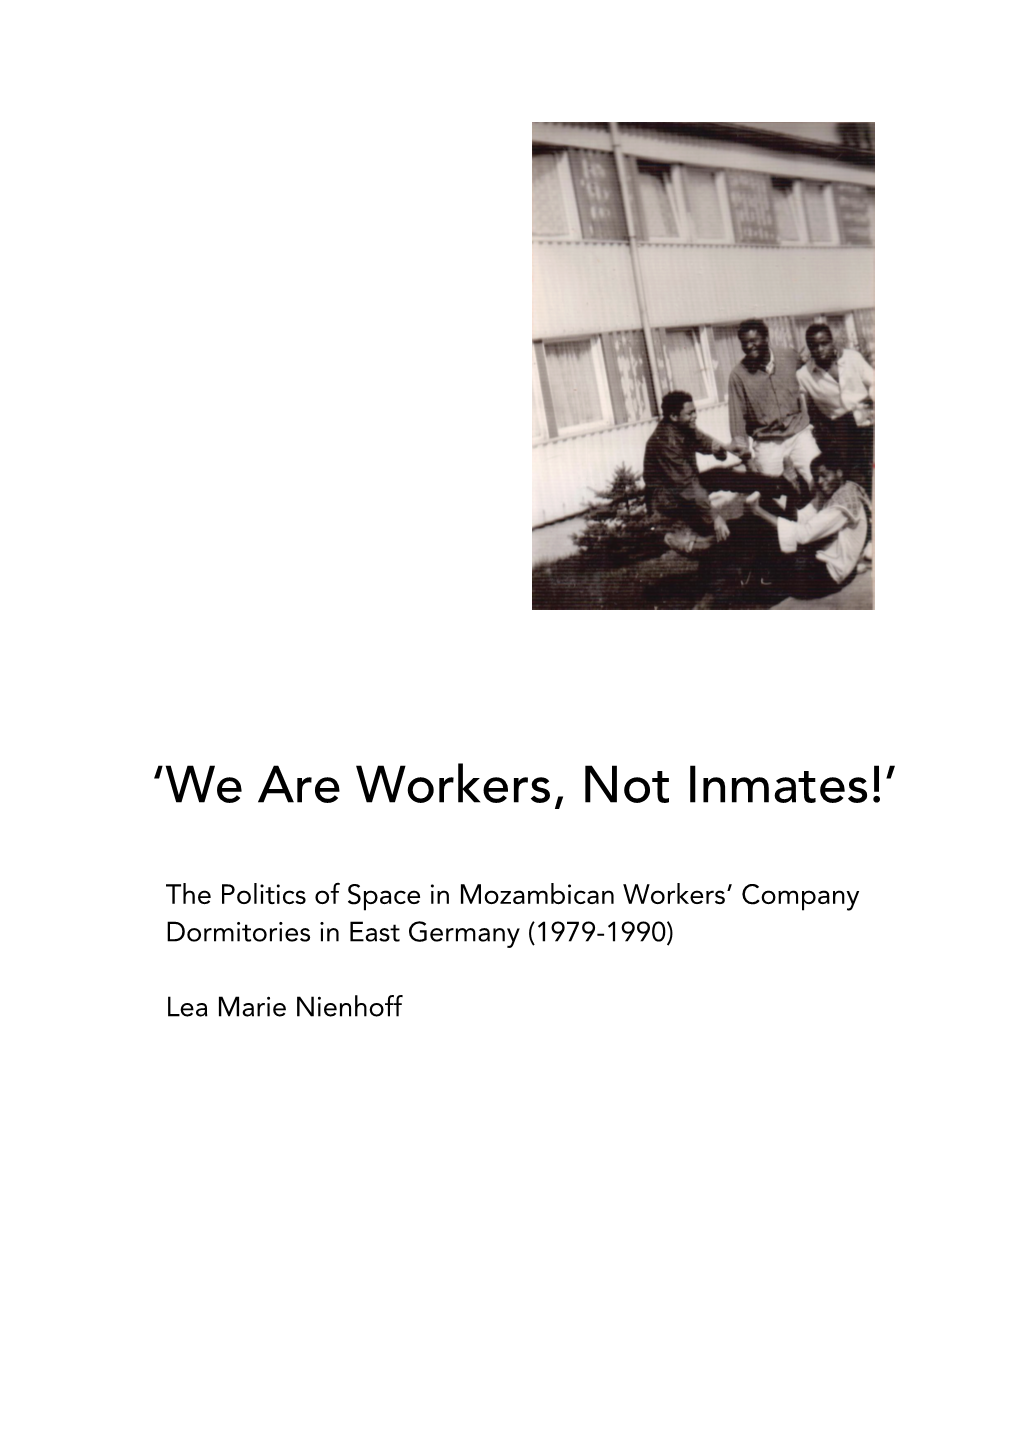 'We Are Workers, Not Inmates!': the Politics of Space in Mozambican Workers' Company Dormitories in East Germany (1979-1990)